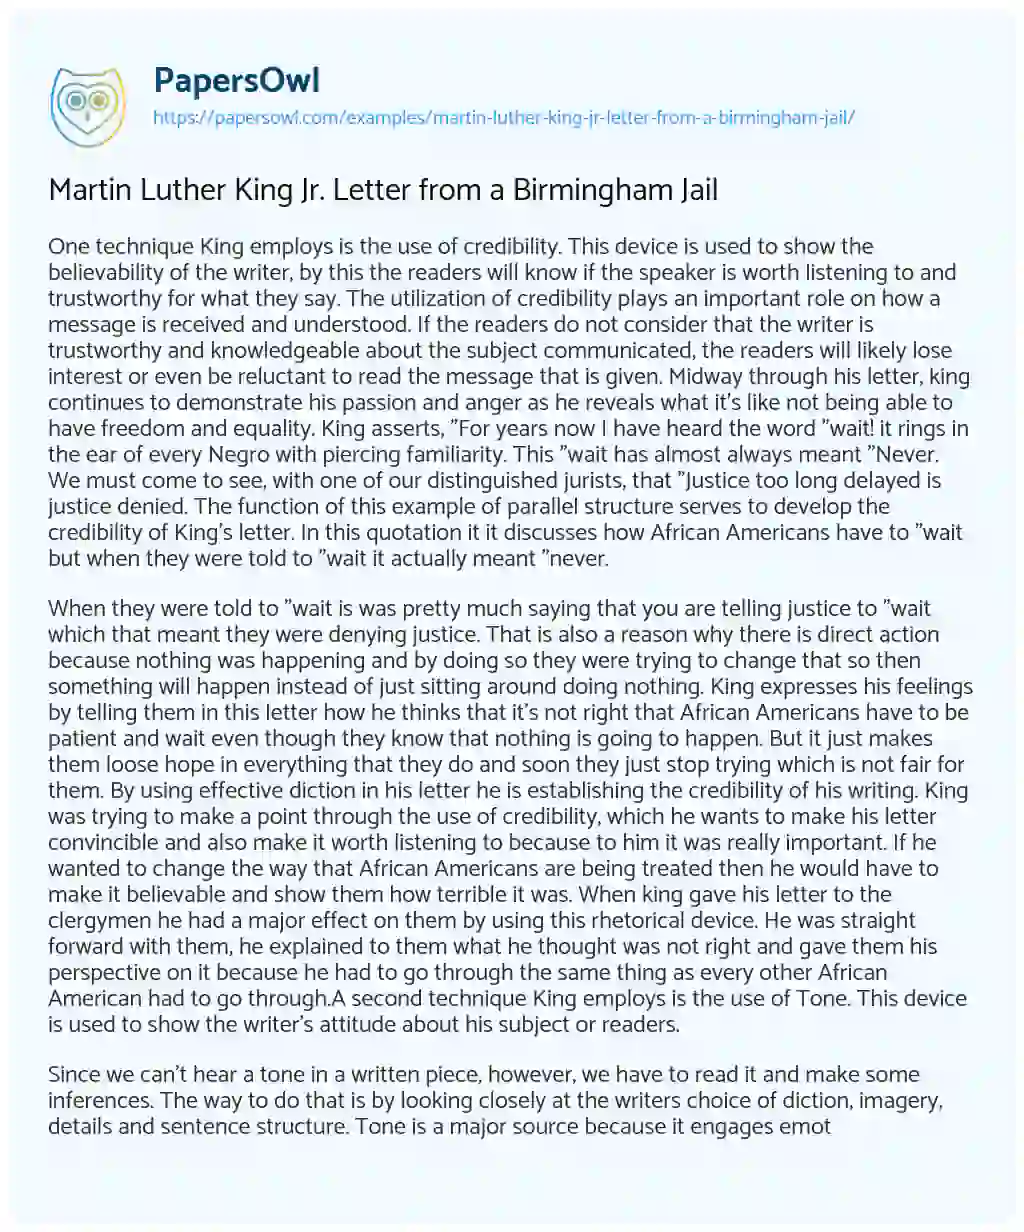 Essay on Martin Luther King Jr. Letter from a Birmingham Jail